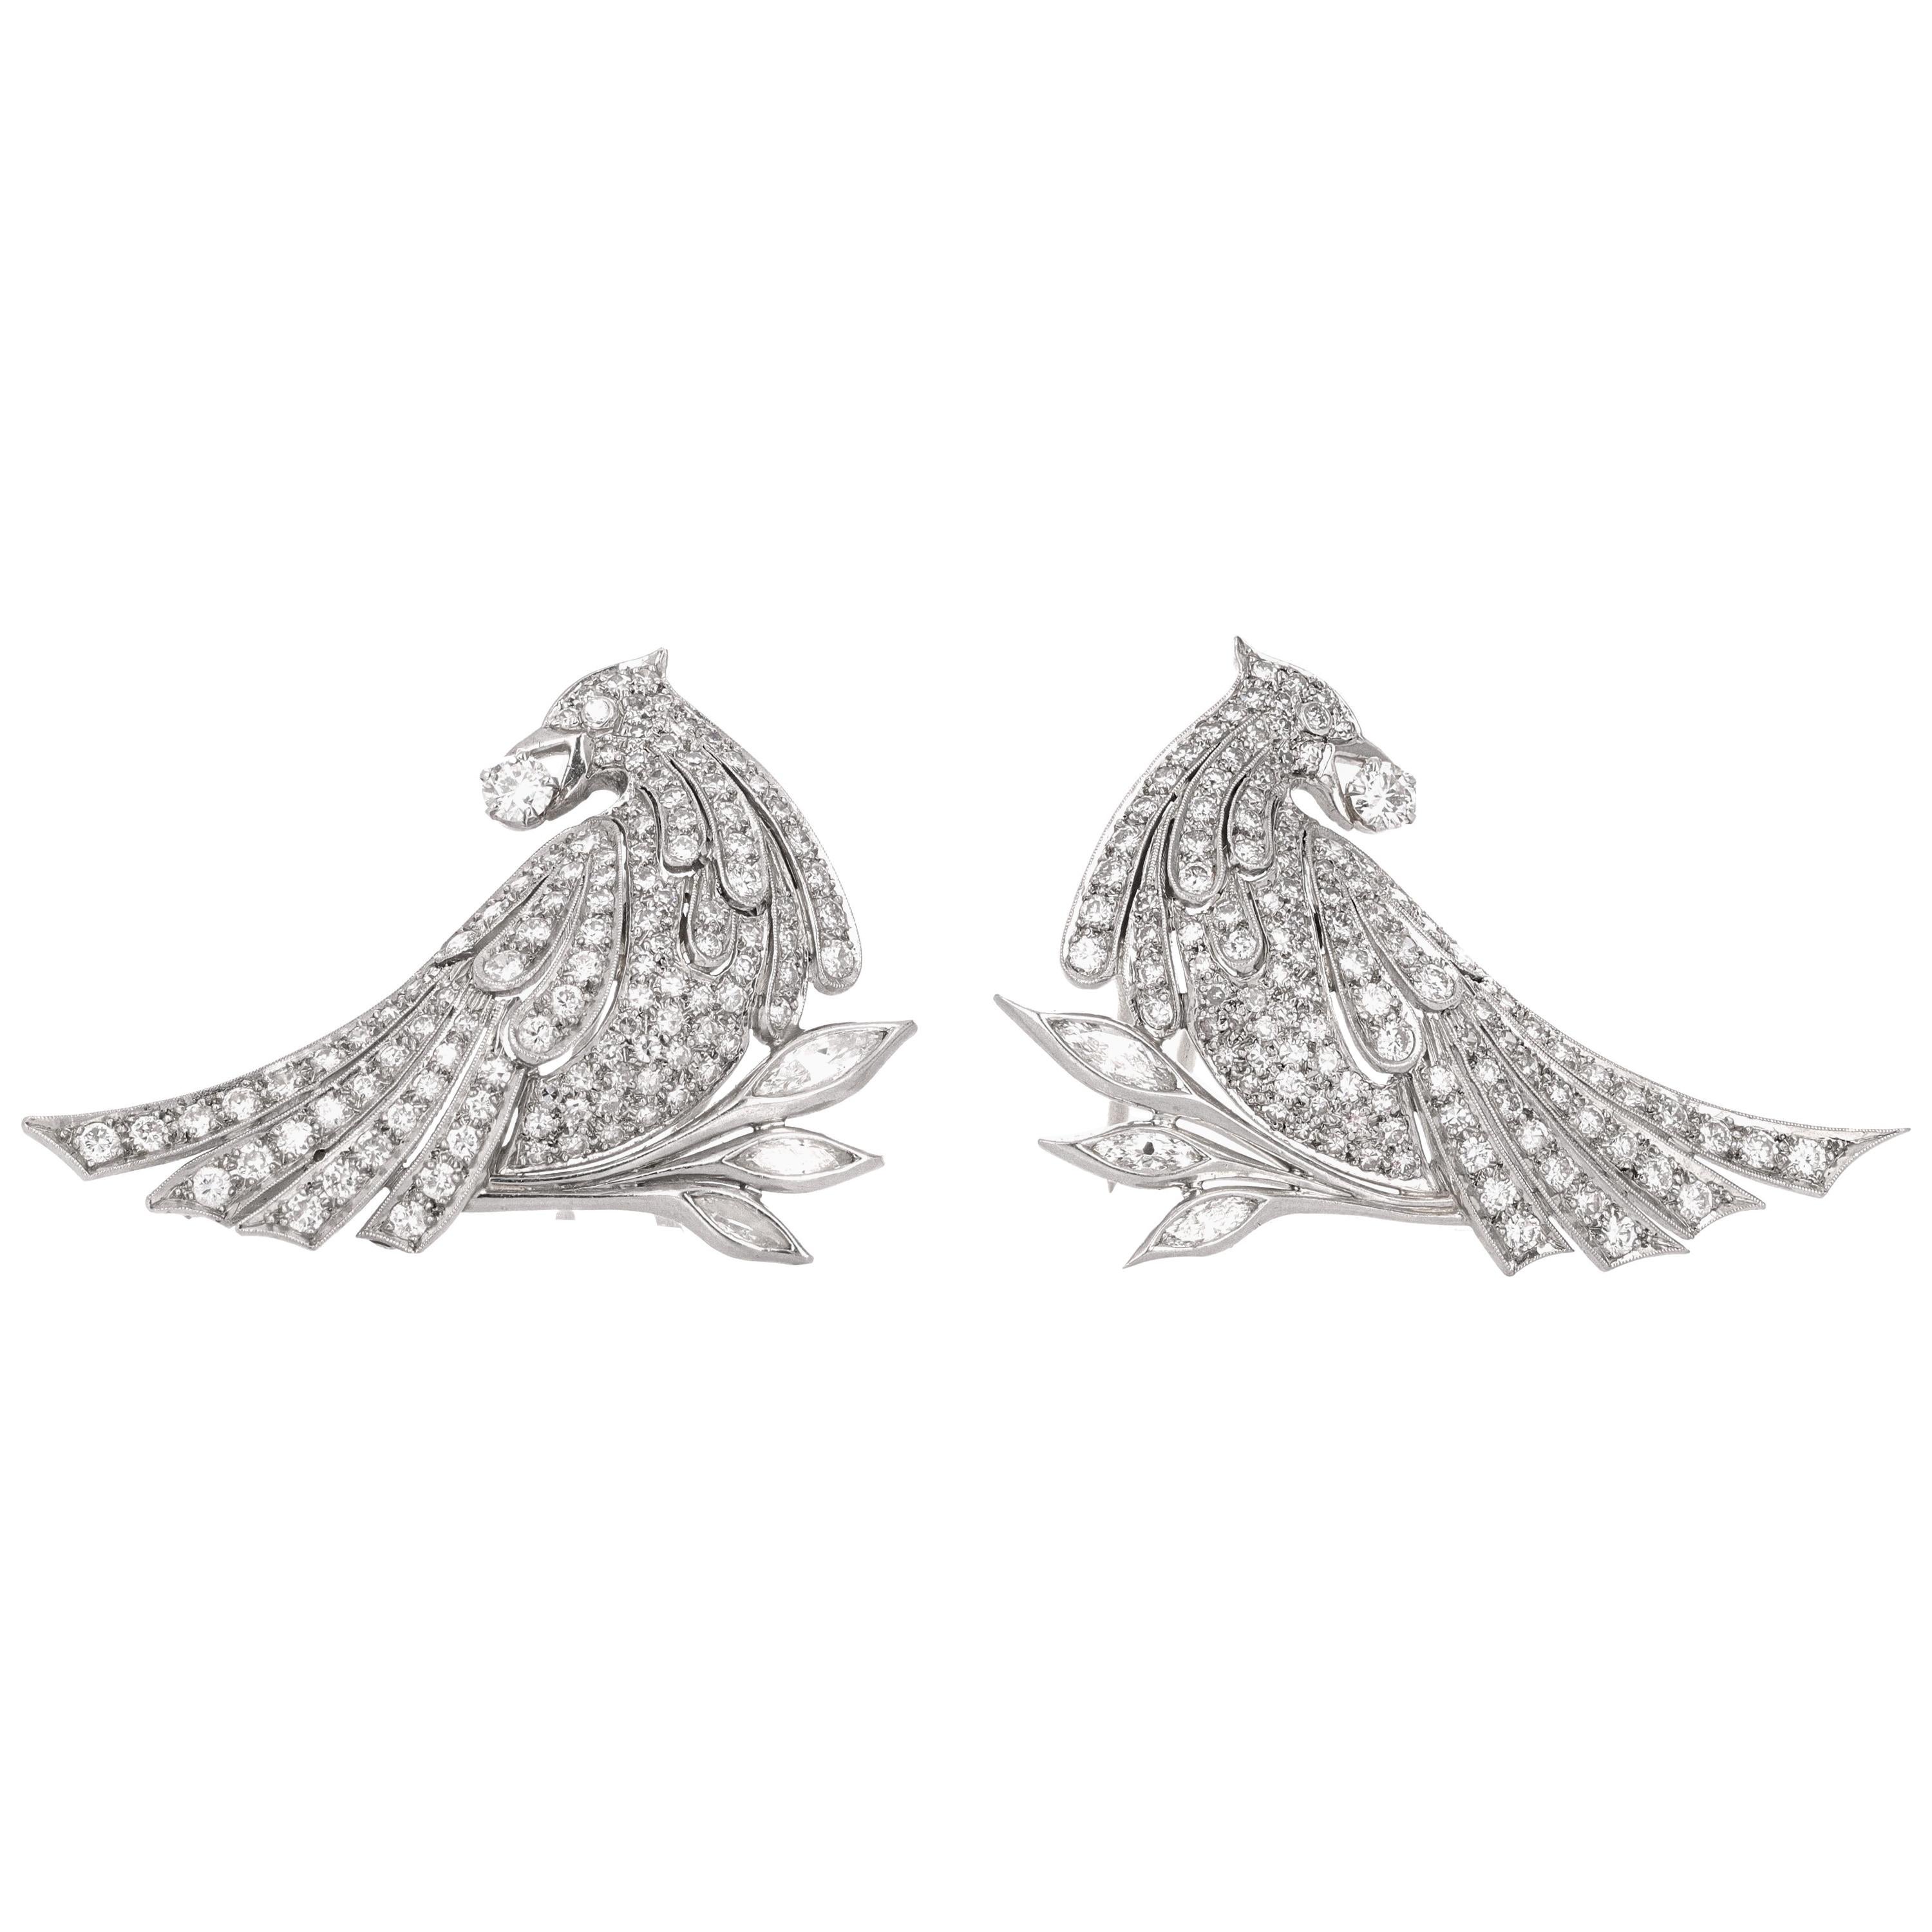 Antique Pair of Edwardian Style Diamond Bird Brooches/ Lapel Clips